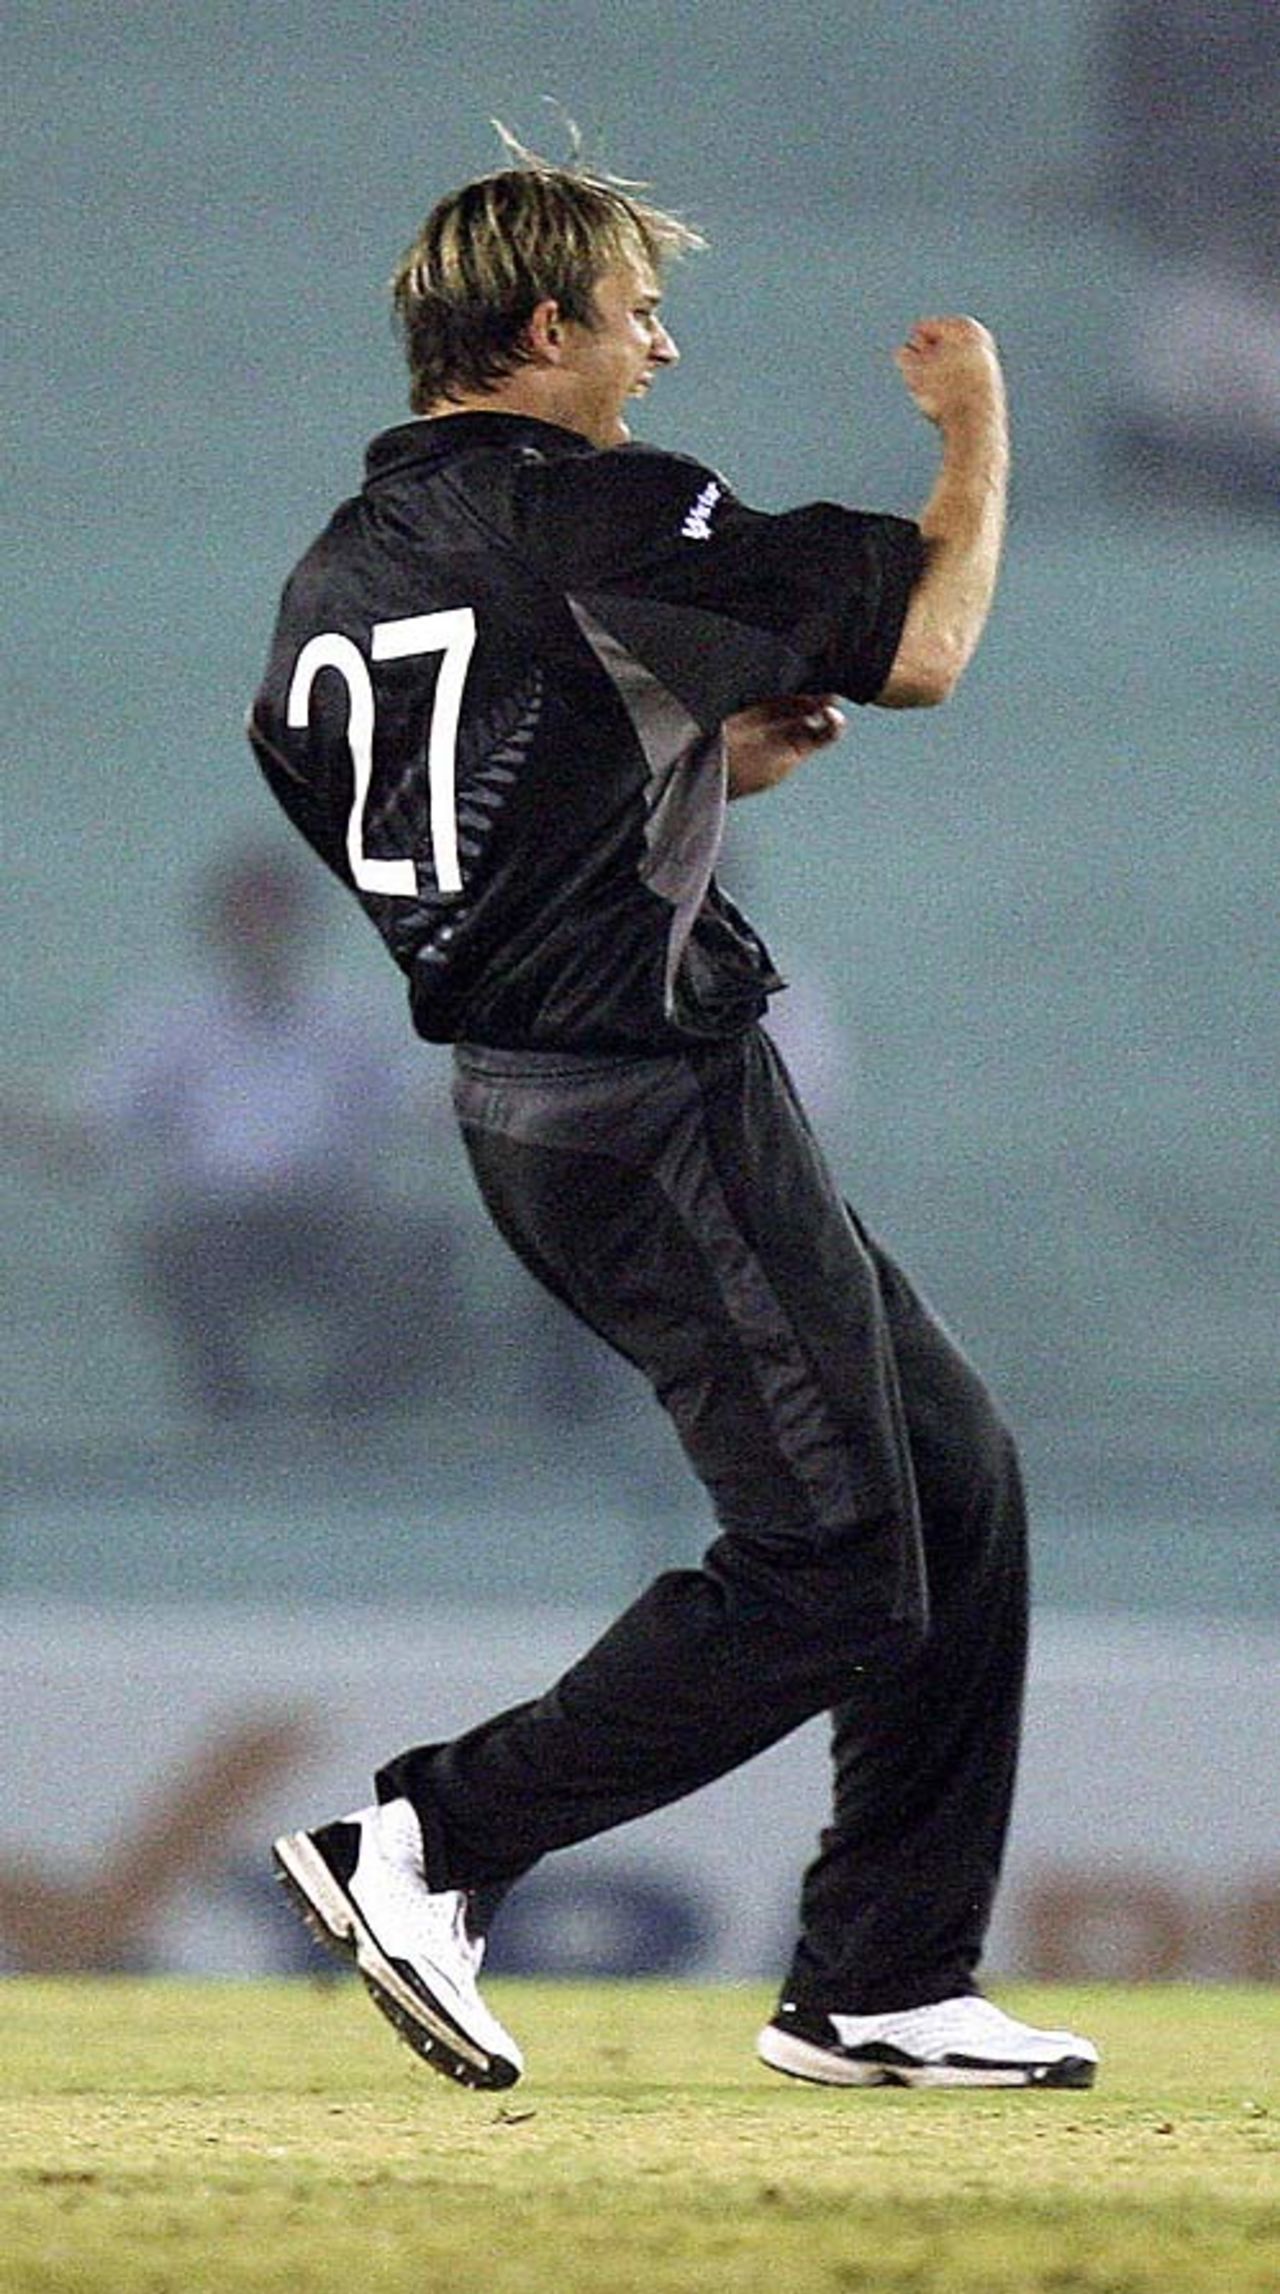 Shane Bond pumps his fists after dismissing Mohammad Yousuf, 8th match, Mohali, Champions Trophy, October 25, 2006